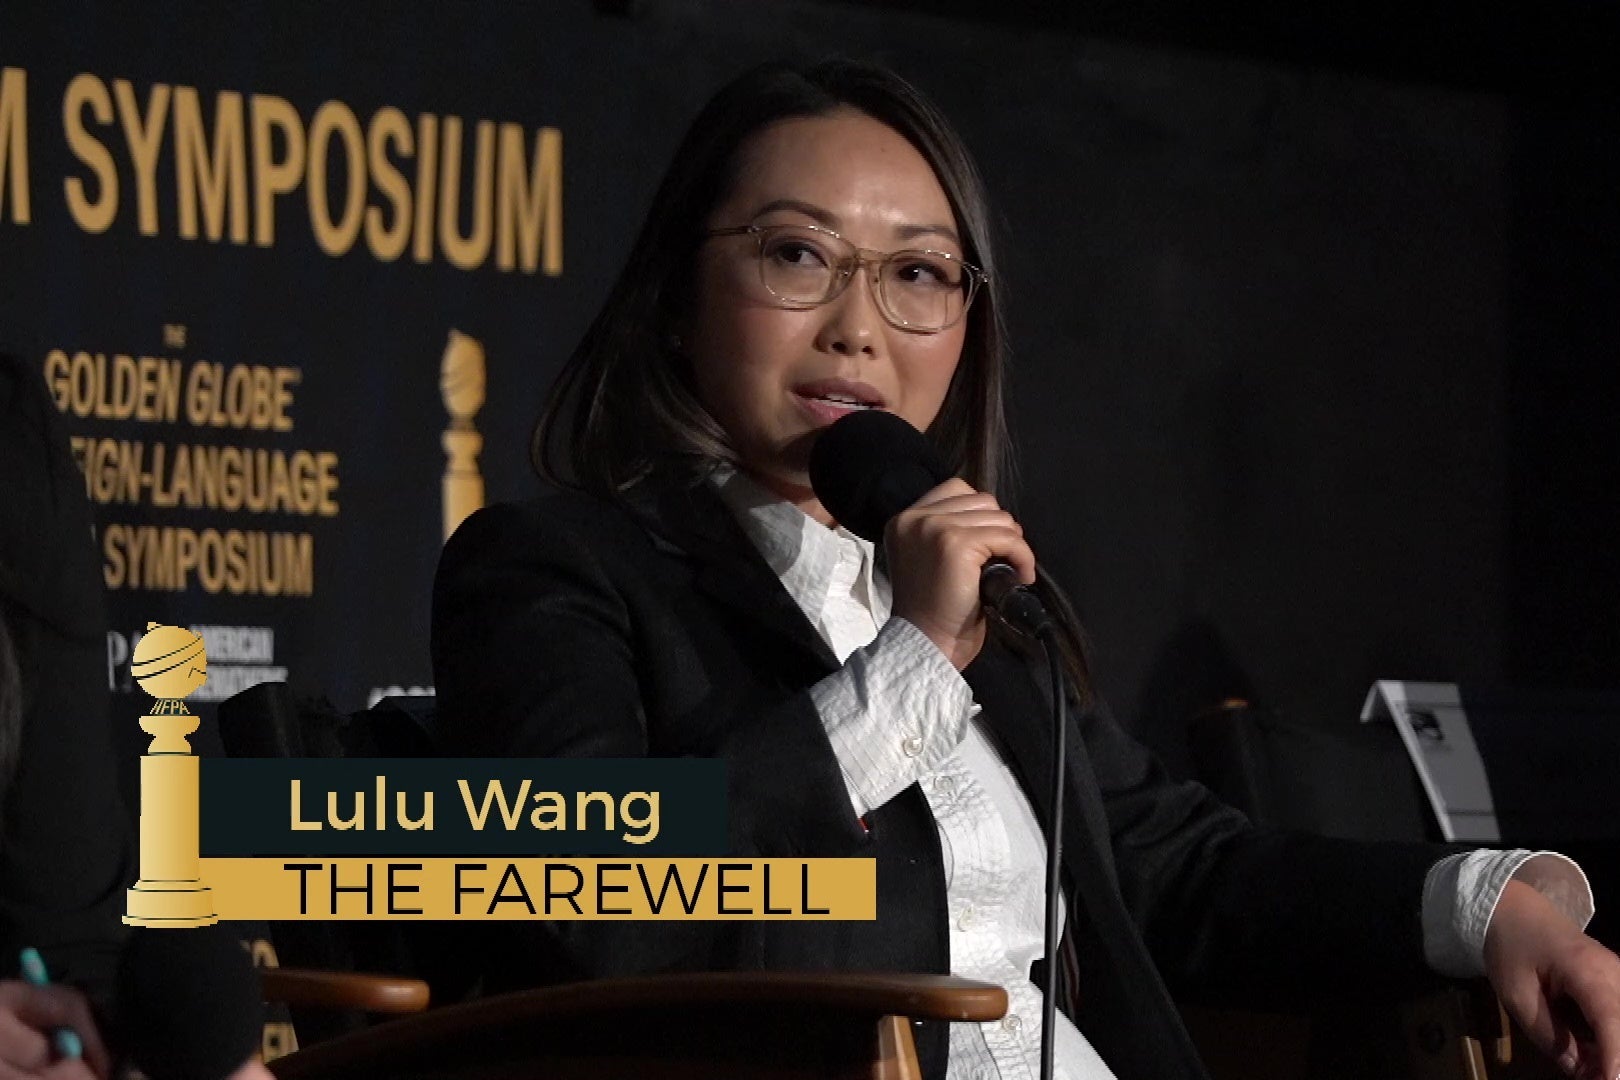 Lulu Wang sitting in a director's chair answering questions on stage at the Egyptian Theatre.